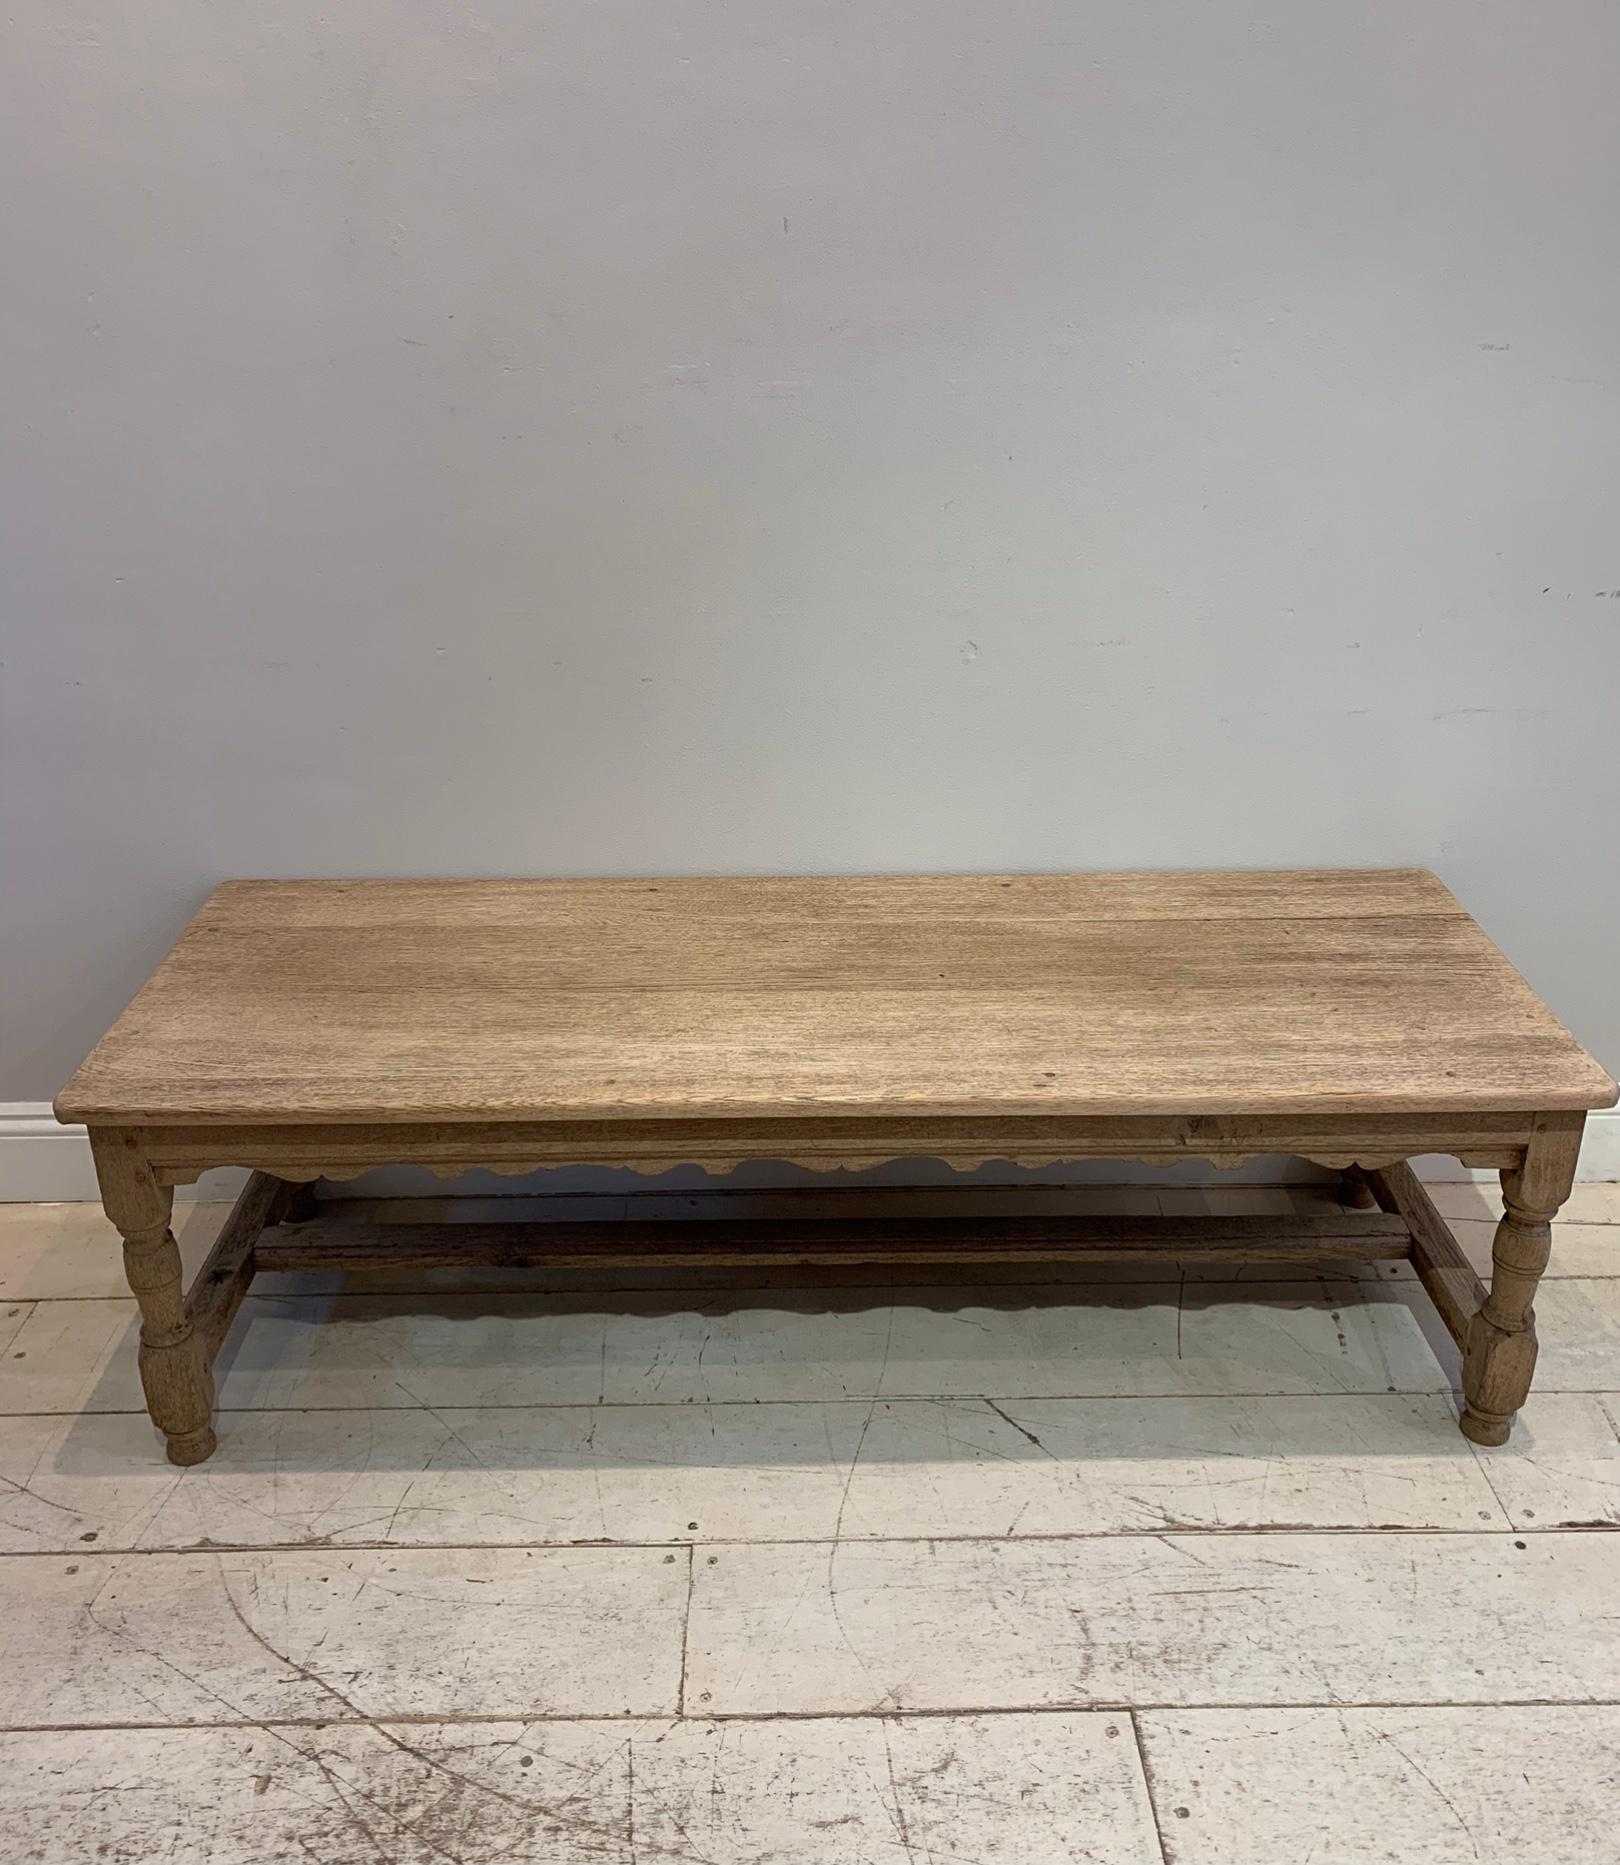 A very useful bleached oak bench from the early 1900s.
Sturdy and strong in an understated style. Perfect for a coffee table or perhaps with a long cushion creating a window seat or just simply a hall bench.

Please note that the fretwork is only